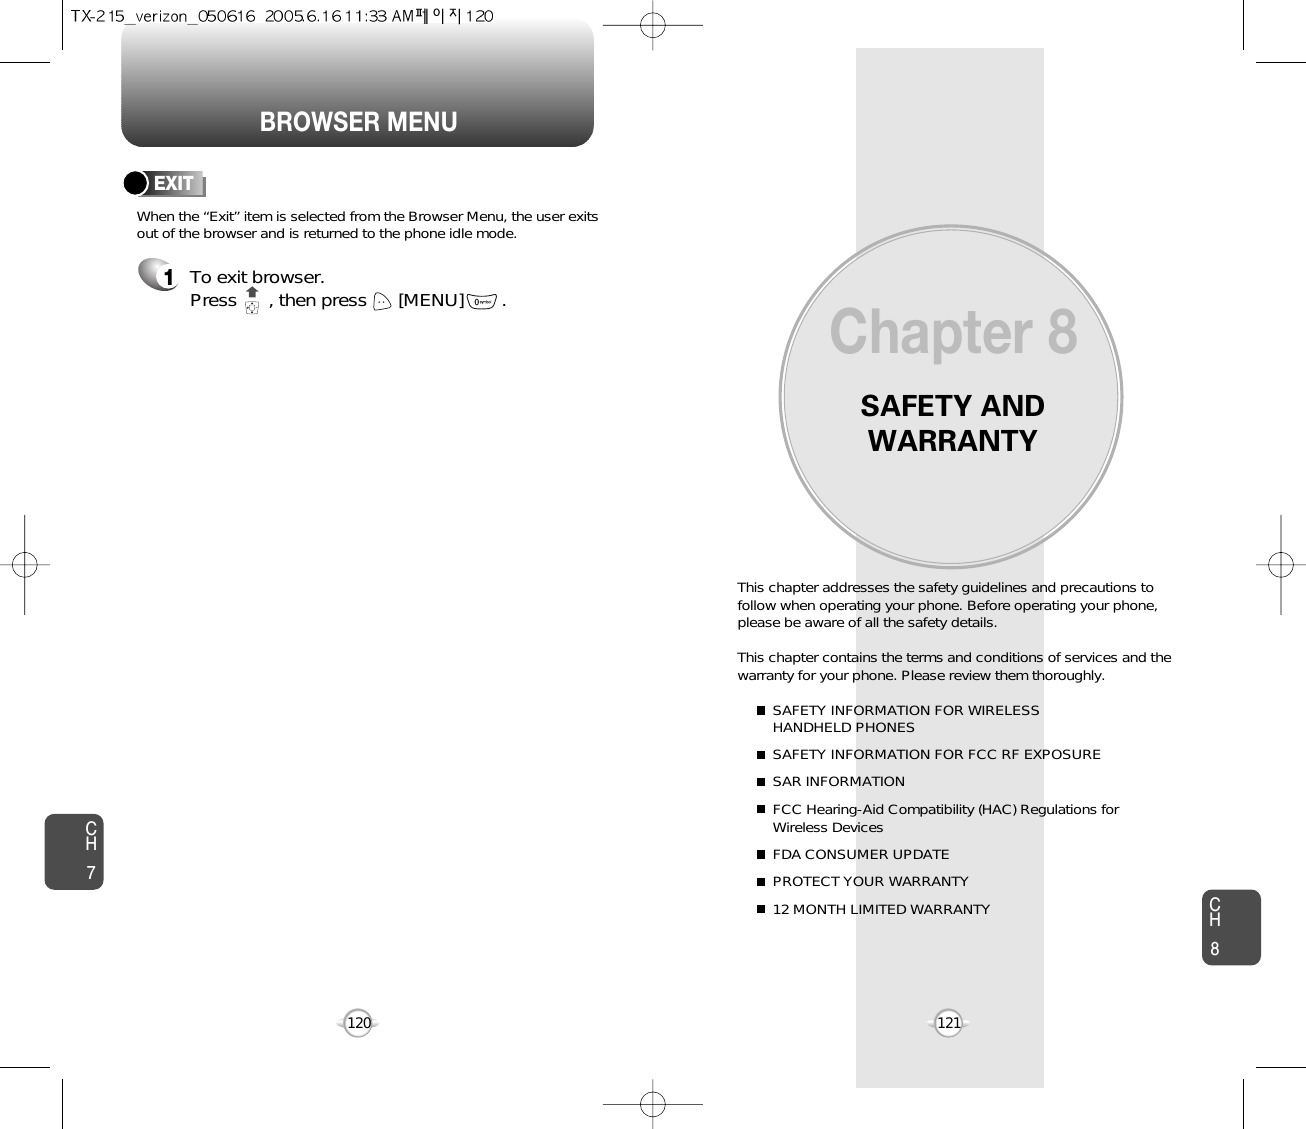 BROWSER MENUSAFETY ANDWARRANTYThis chapter addresses the safety guidelines and precautions tofollow when operating your phone. Before operating your phone,please be aware of all the safety details.This chapter contains the terms and conditions of services and thewarranty for your phone. Please review them thoroughly. SAFETY INFORMATION FOR WIRELESS HANDHELD PHONESSAFETY INFORMATION FOR FCC RF EXPOSURESAR INFORMATIONFCC Hearing-Aid Compatibility (HAC) Regulations for Wireless DevicesFDA CONSUMER UPDATEPROTECT YOUR WARRANTY12 MONTH LIMITED WARRANTYChapter 8121CH7CH8120To exit browser.Press      , then press [MENU] . EXIT1When the “Exit” item is selected from the Browser Menu, the user exitsout of the browser and is returned to the phone idle mode.